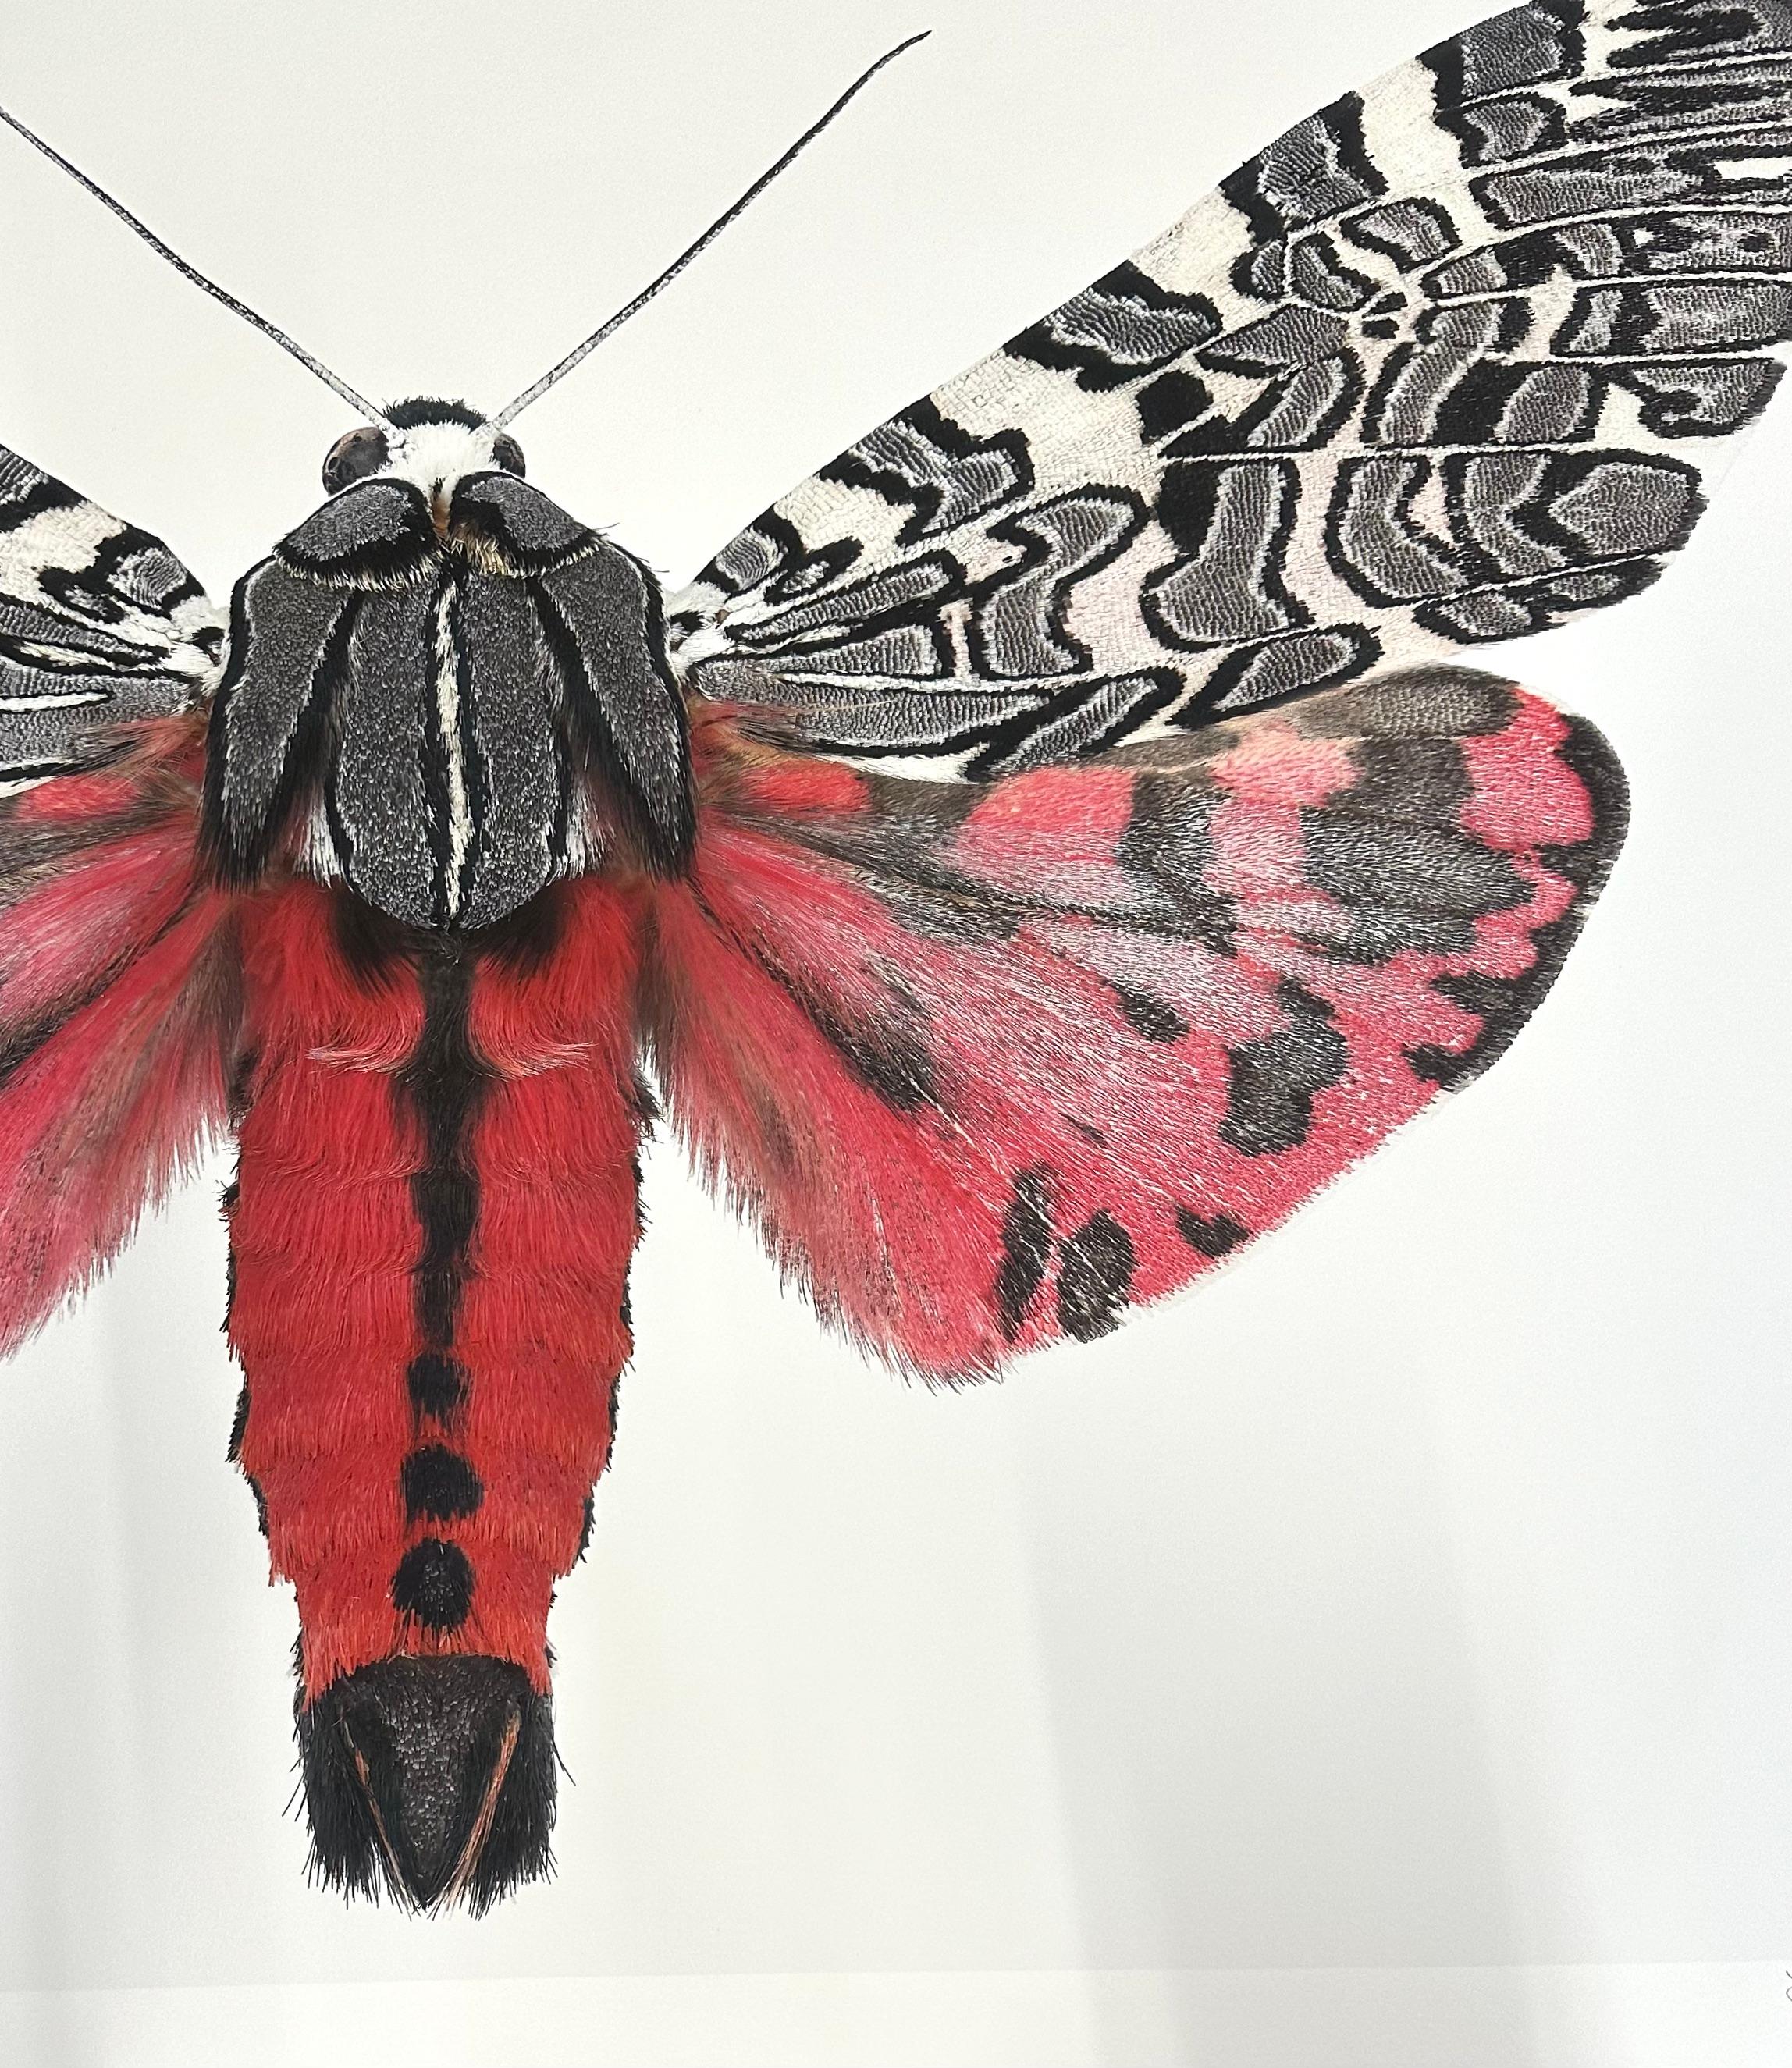 In this hyper-detailed archival pigment print on watercolor paper, a magenta pink moth with black circular markings down its abdomen and black, white and gray on its upper wings is dramatic against a solid white background. 

Price shown is the